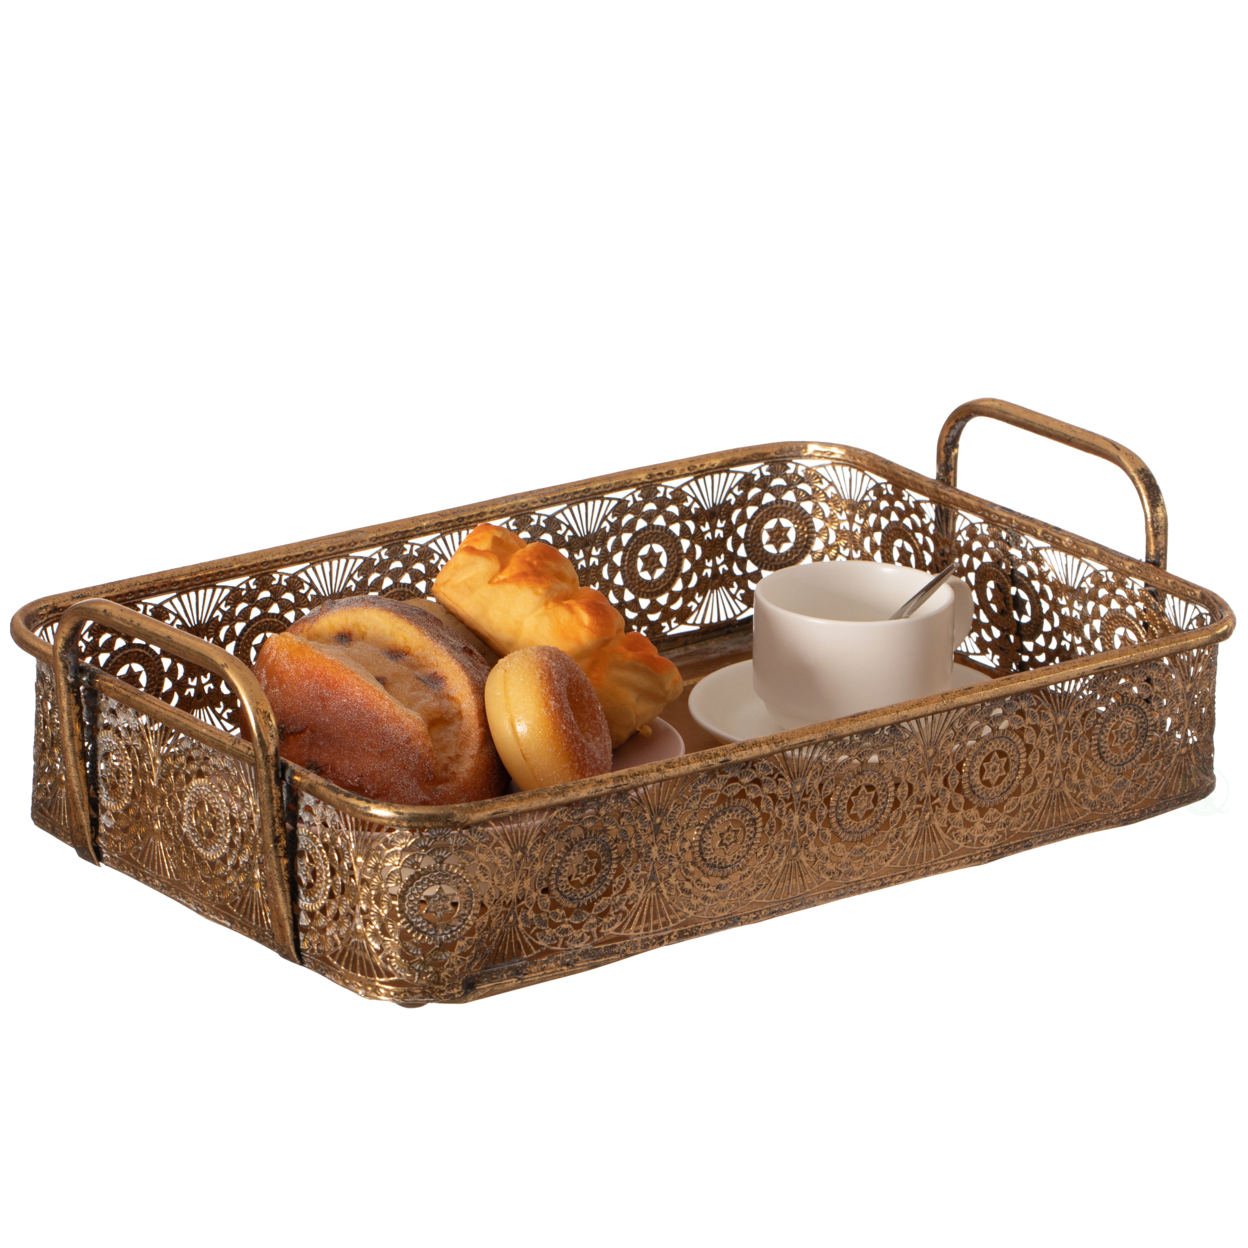 Metal Gold Rectangular Serving Tray With Oval Design And Handles - Medium